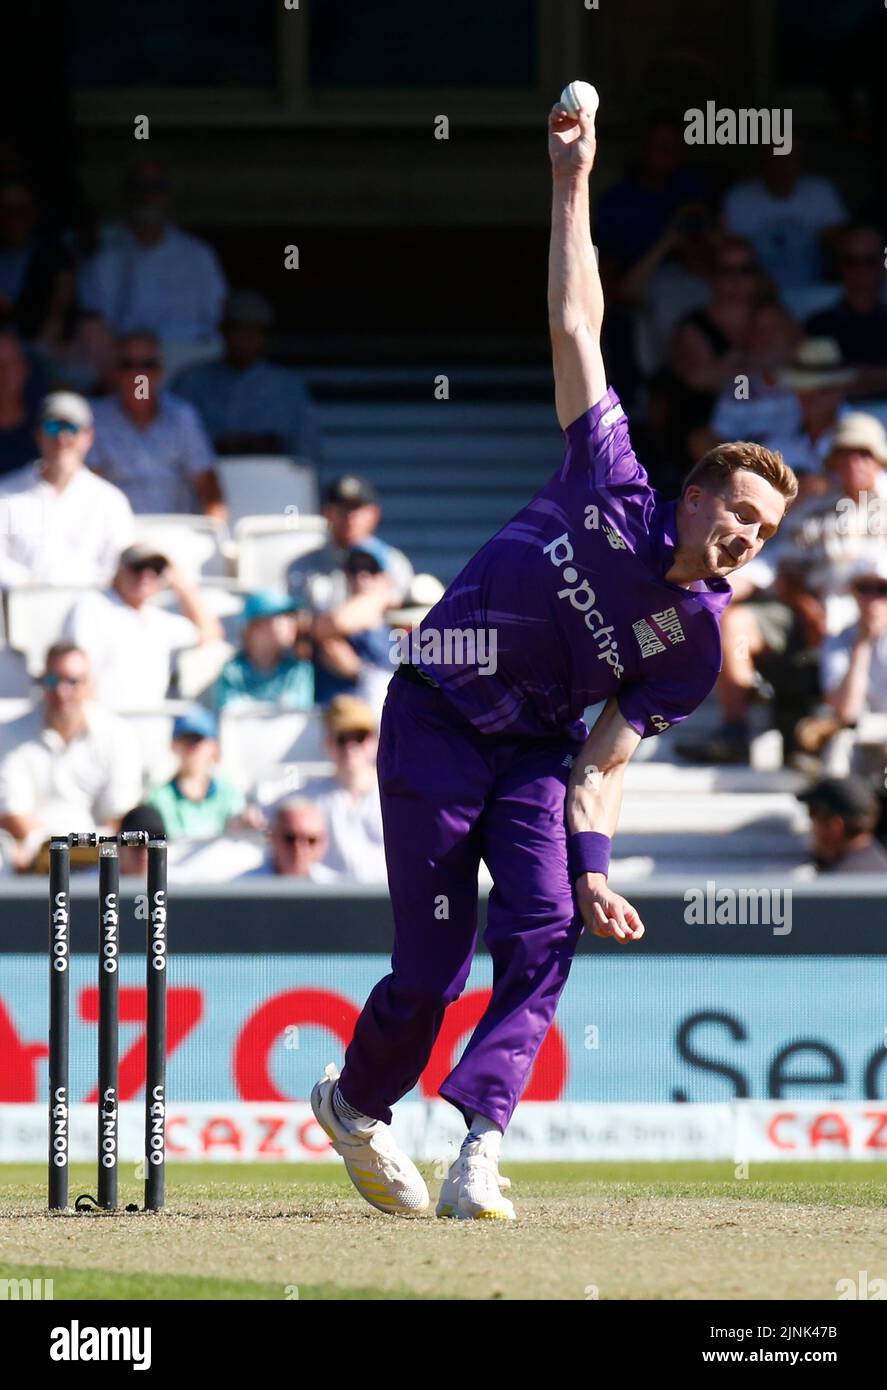 LONDON ENGLAND - AUGUST  11 : Craig Miles during The Hundred Men match between Oval Invincible's against Northern Supercharges at Kia Oval Ground, Lon Stock Photo